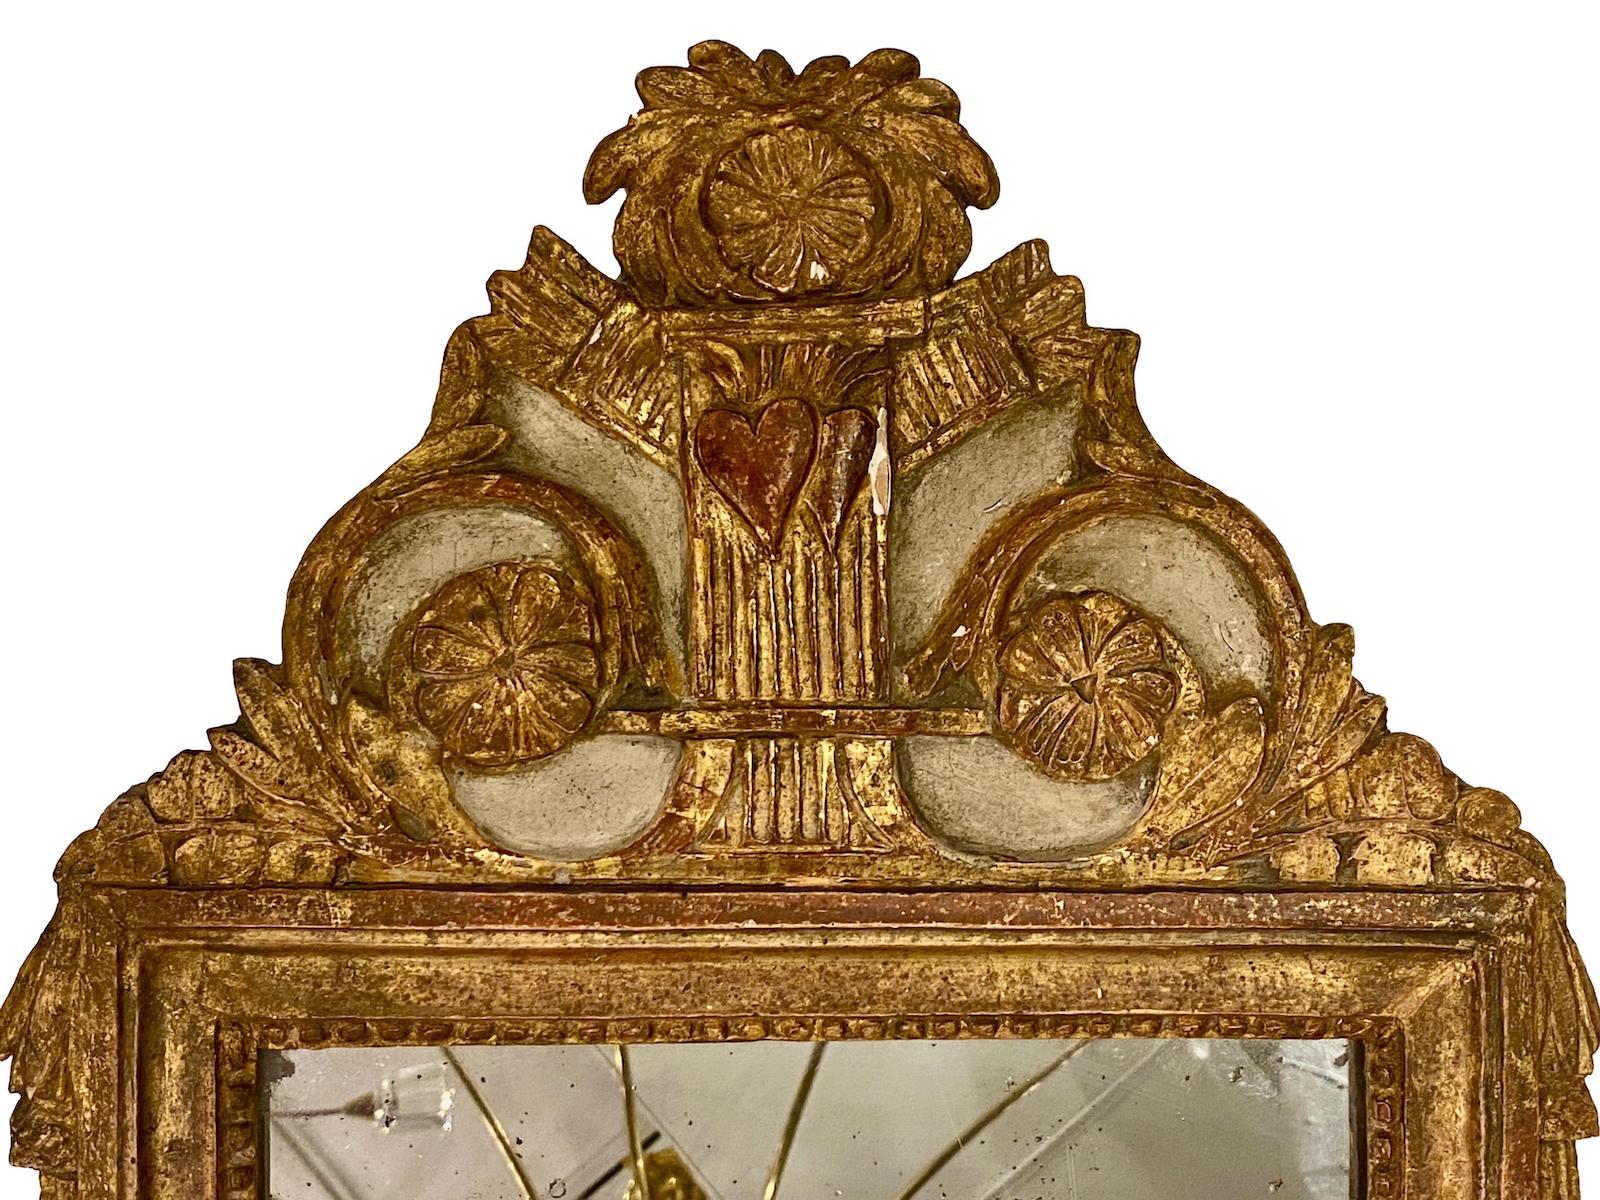 A circa late 19th century French gilt wood and painted mirror with original finish.

Measurements:
Total height: 28